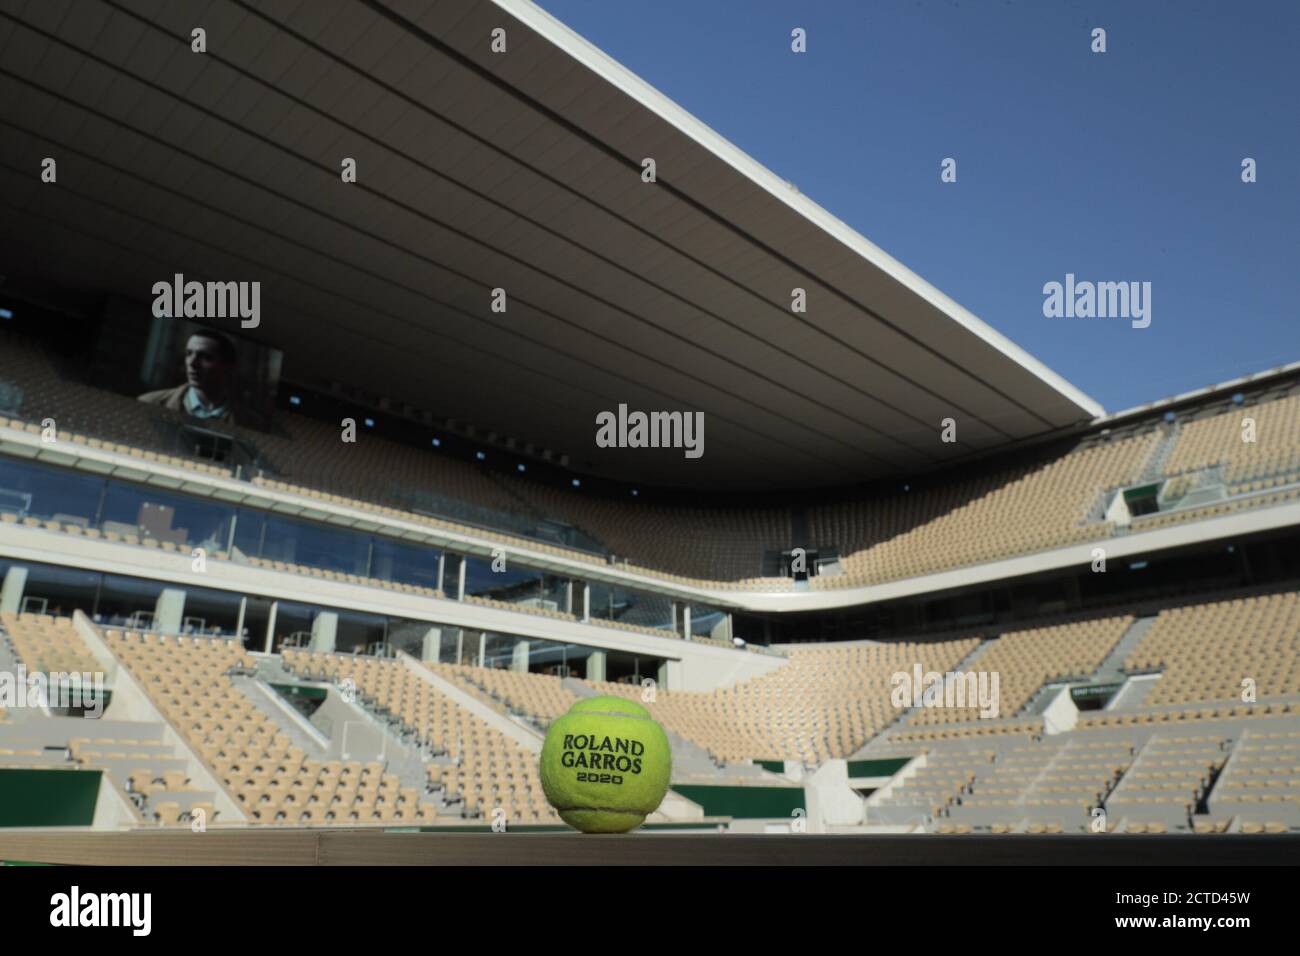 Illustration of official tennis ball Roland Garros 2020 by Wilson and the roof of Philippe Chatrier court under the CoVid health crisis 19 during the Stock Photo